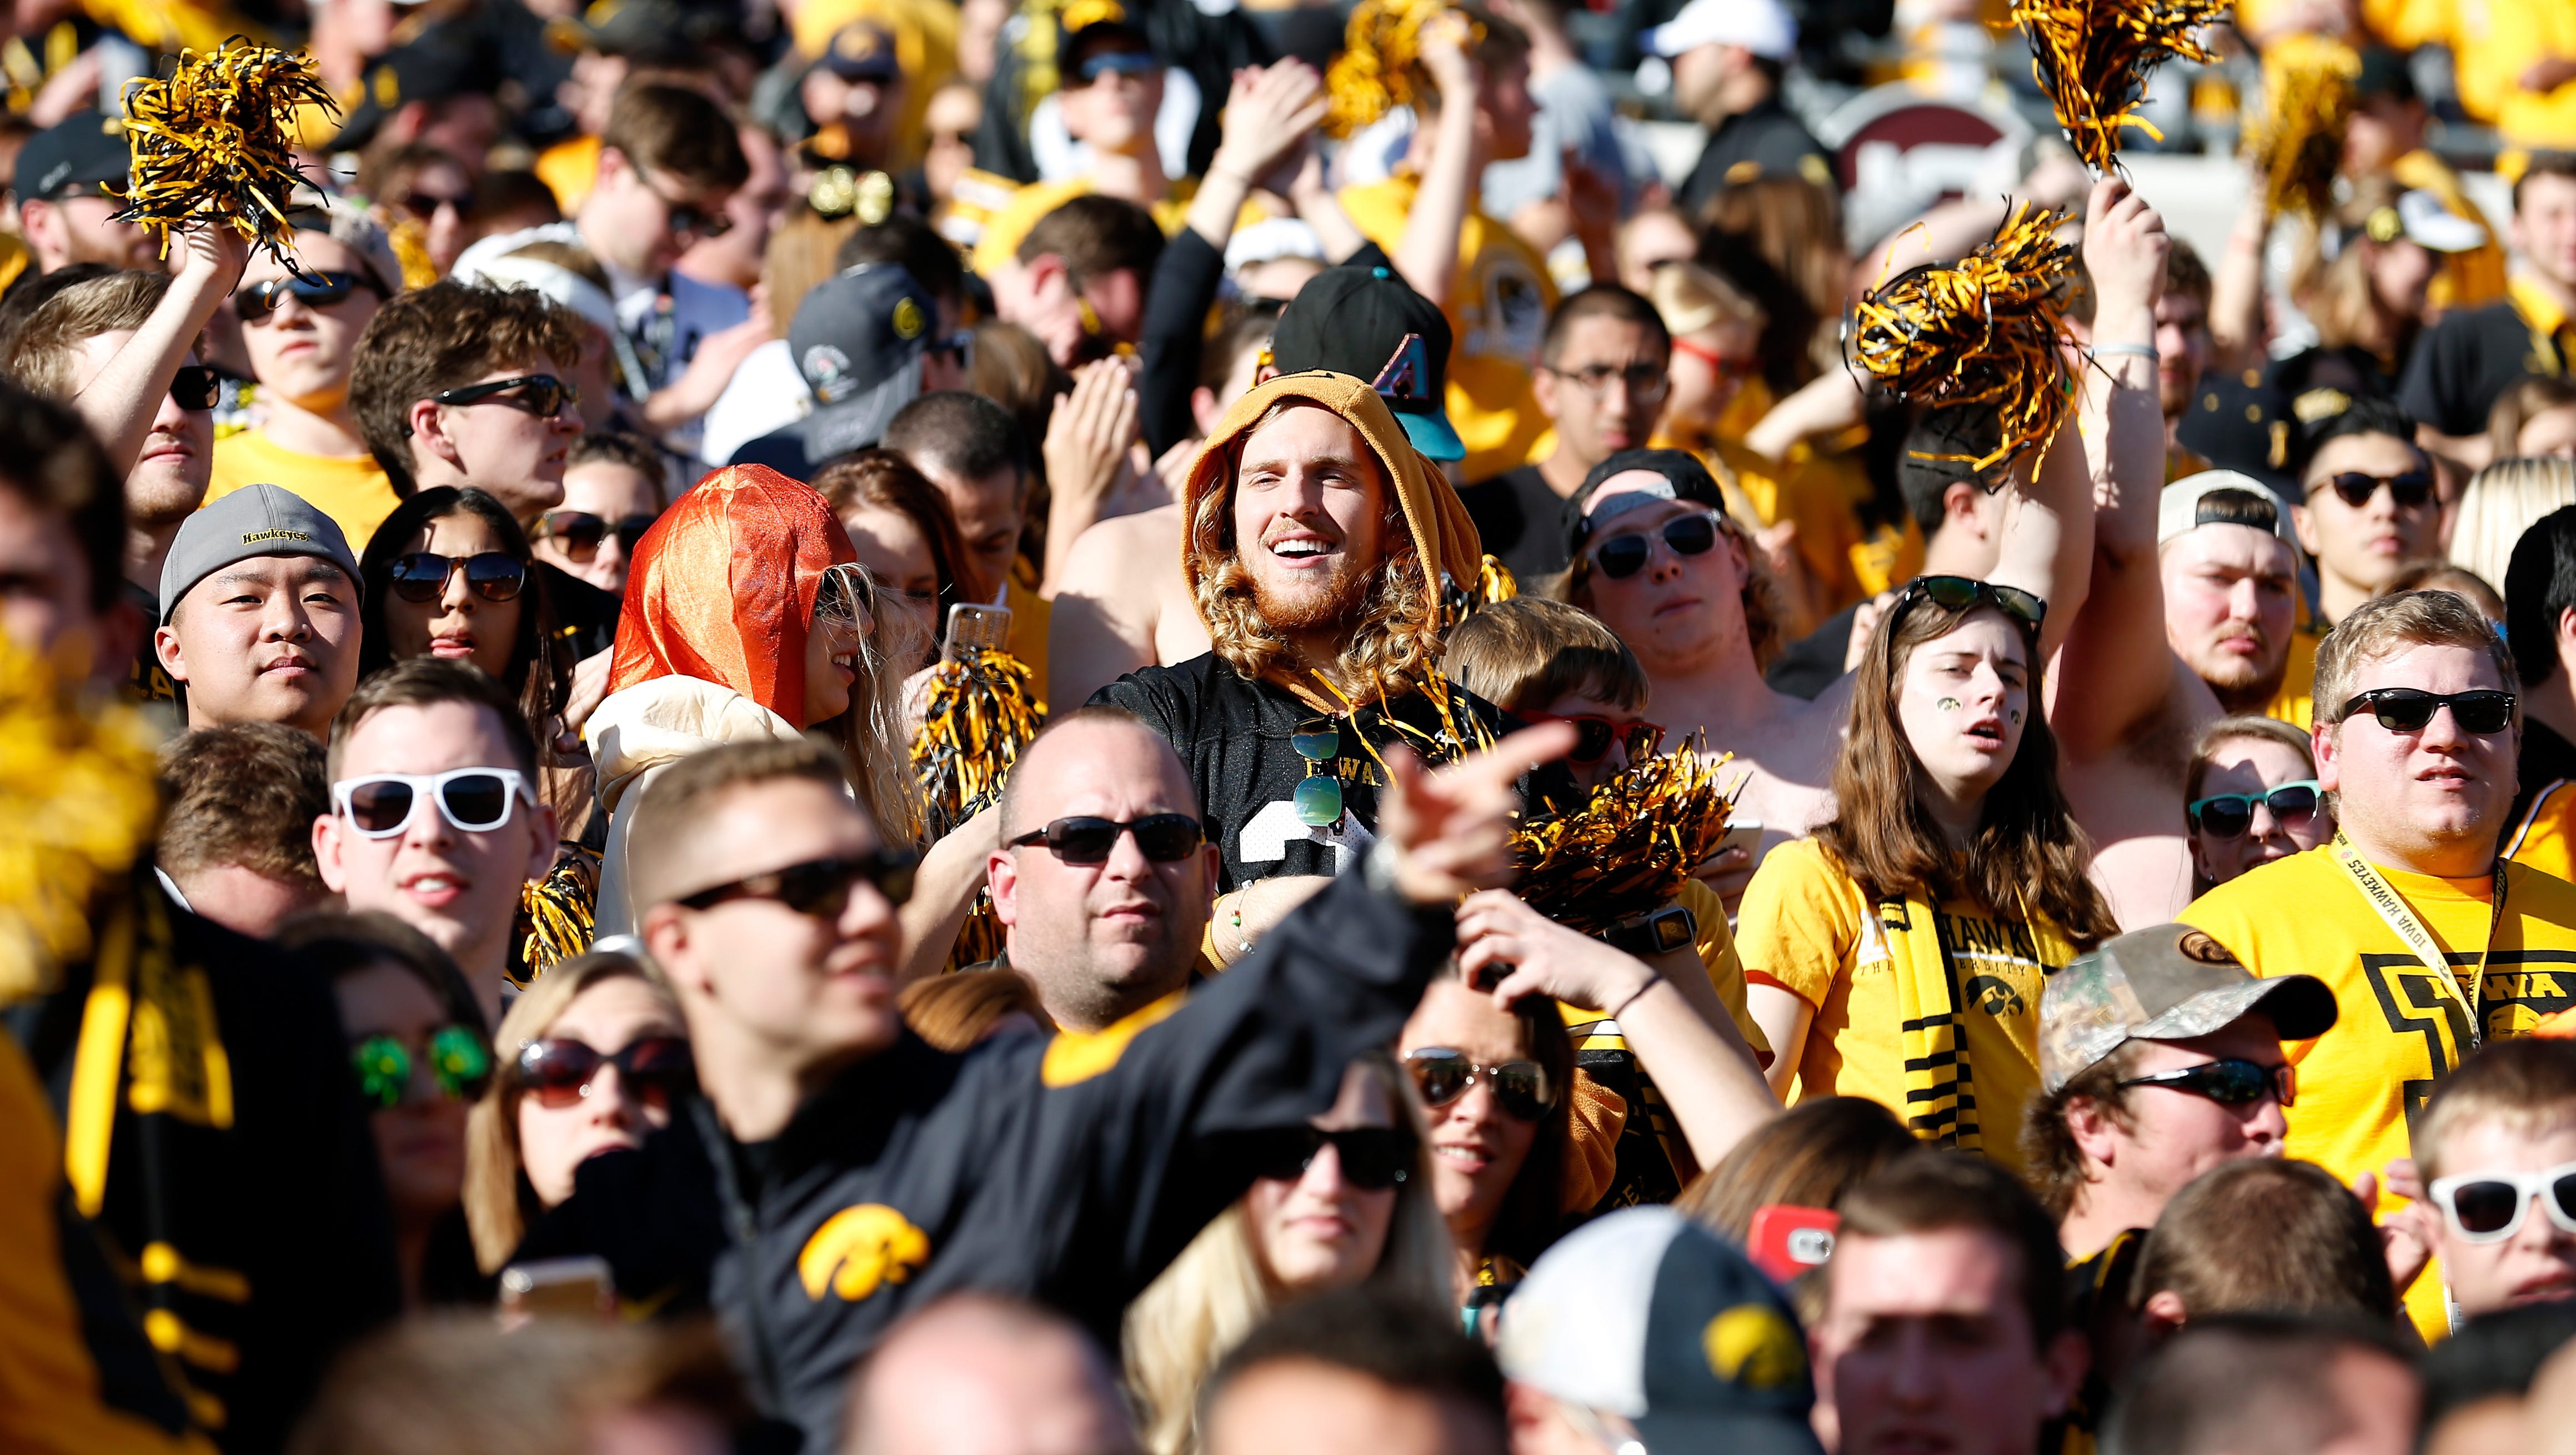 Iowa Hawkeyes fans cheer before the 102nd Rose Bowl Game against the Stanford Cardinal on January 1, 2016 at the Rose Bowl in Pasadena, California.